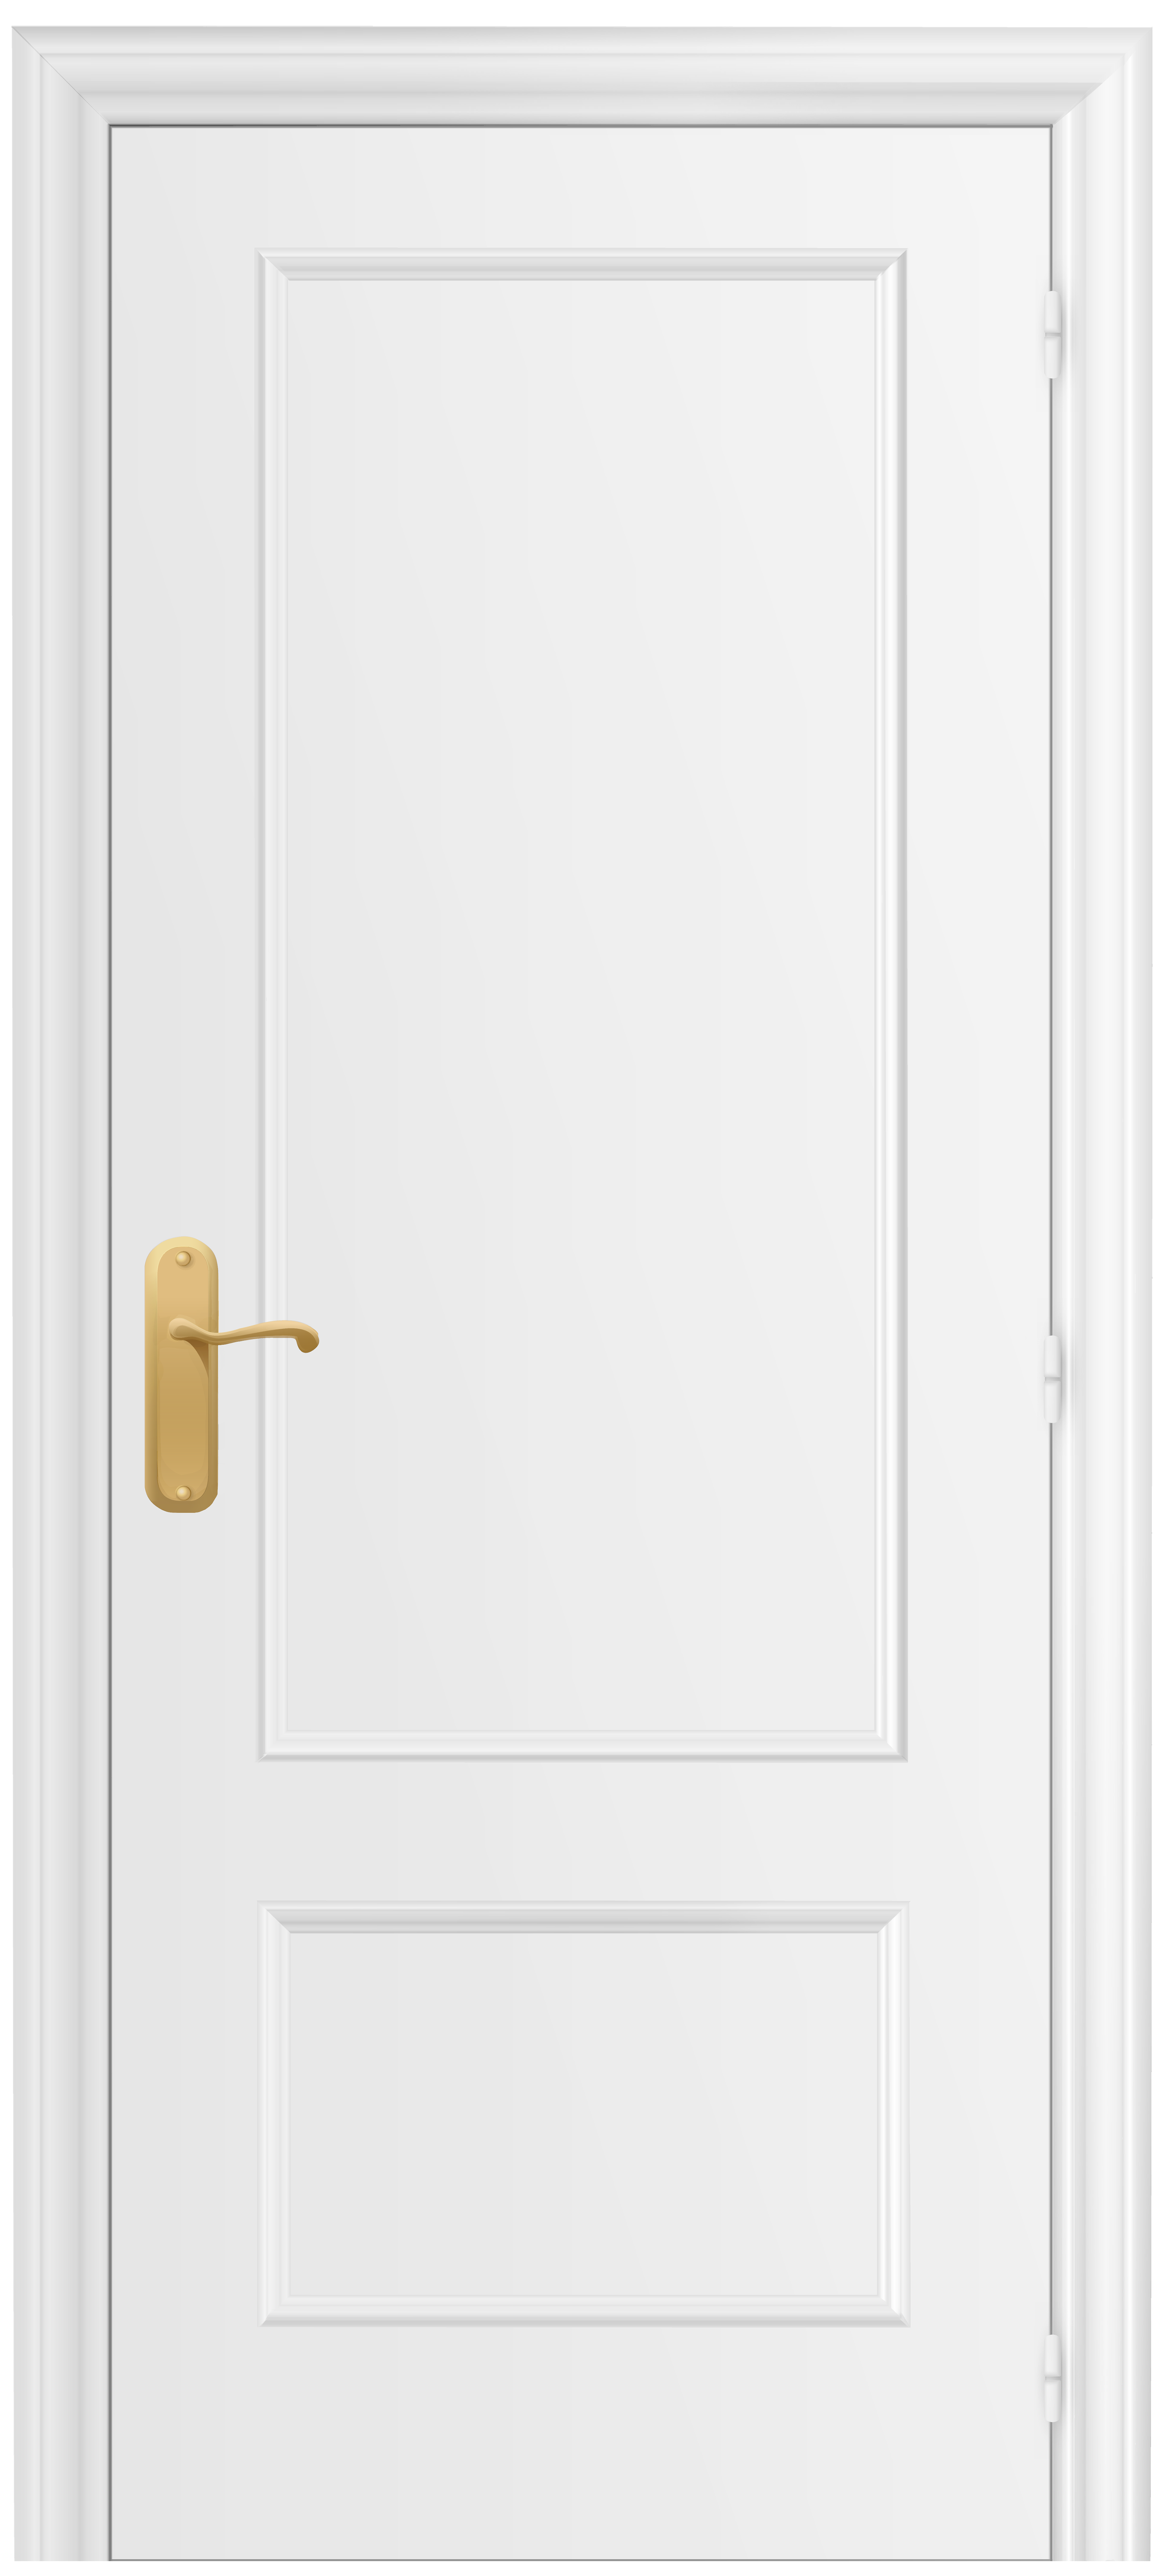 closed white door png